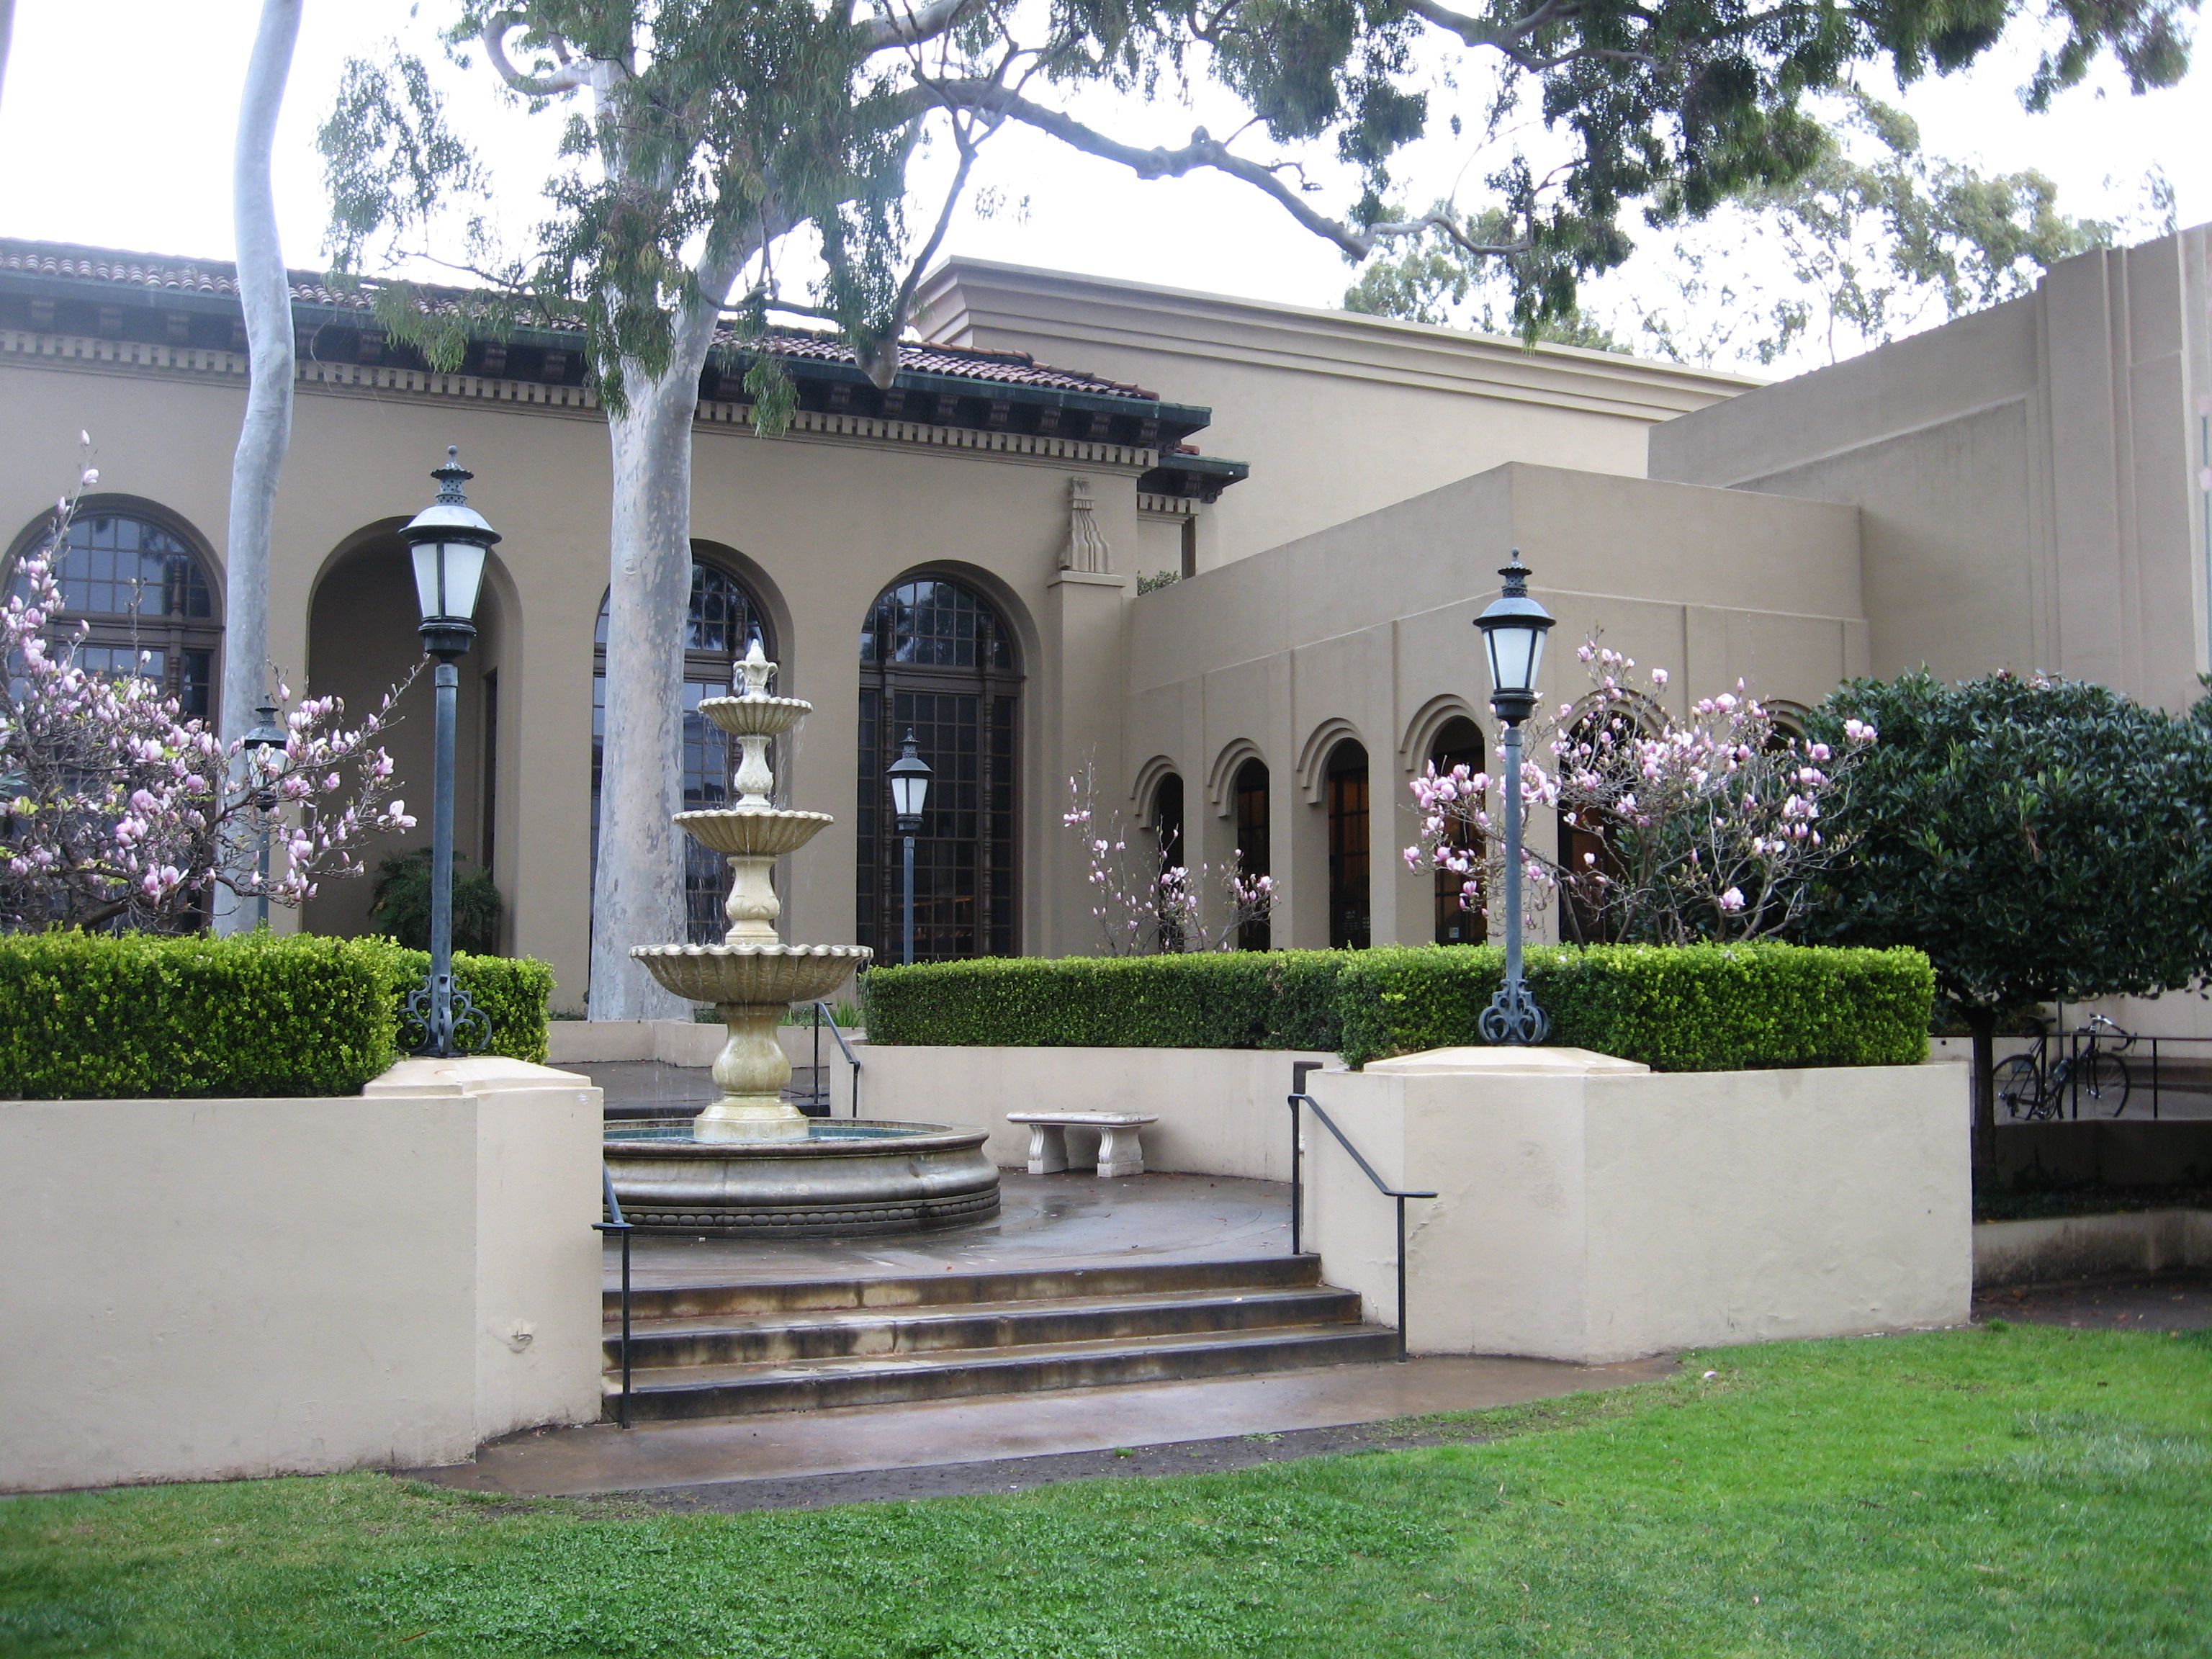 The Santa Barbara Library with a fountain in the front and cherry blossoms in bloom